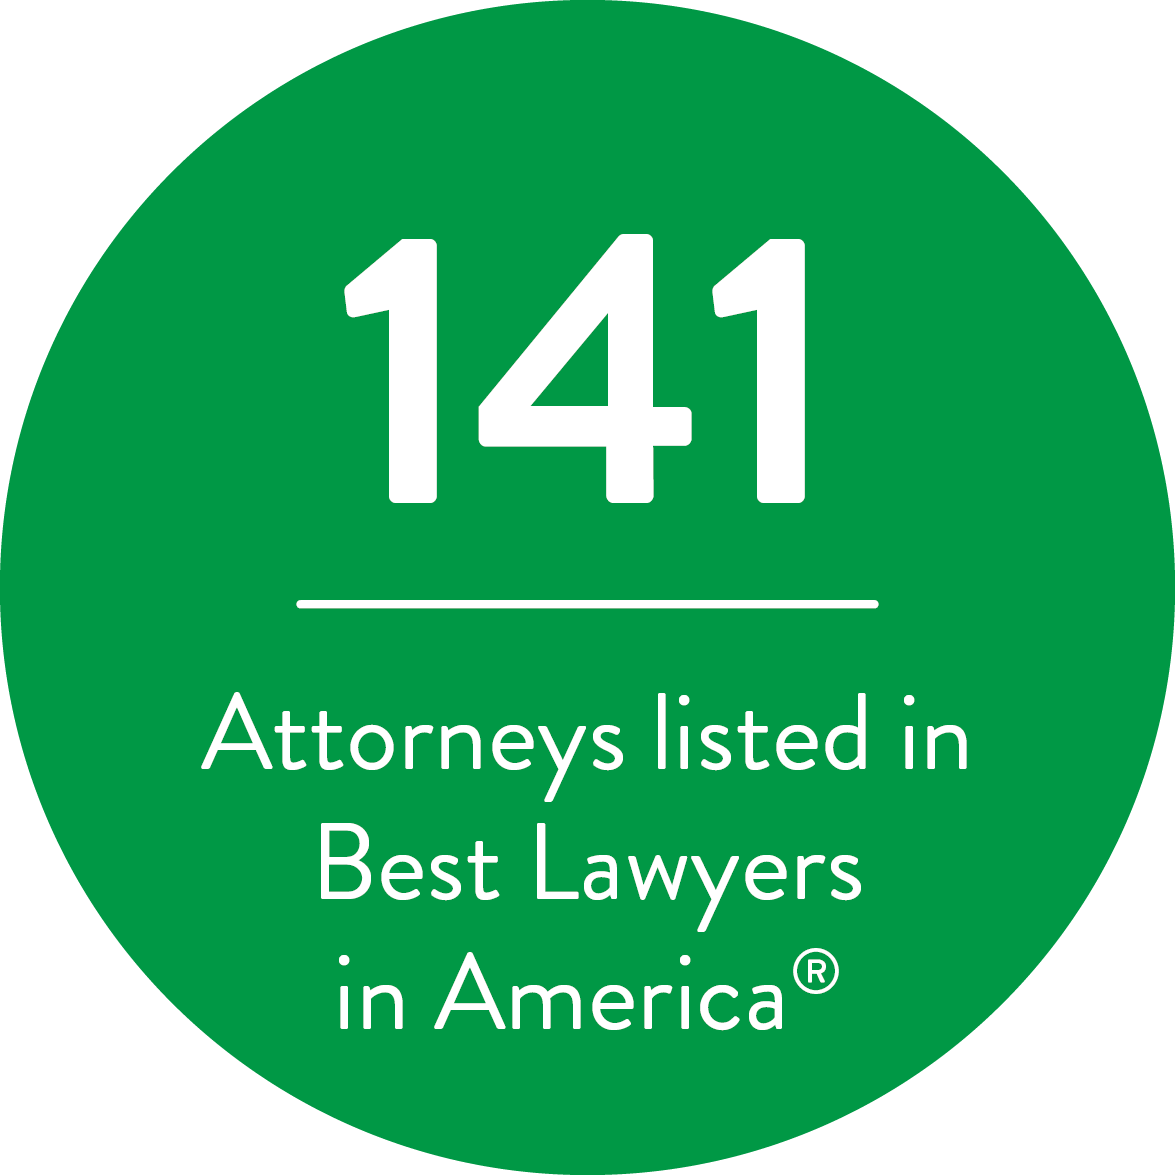 141 Attorneys listed in Best Lawyers in America